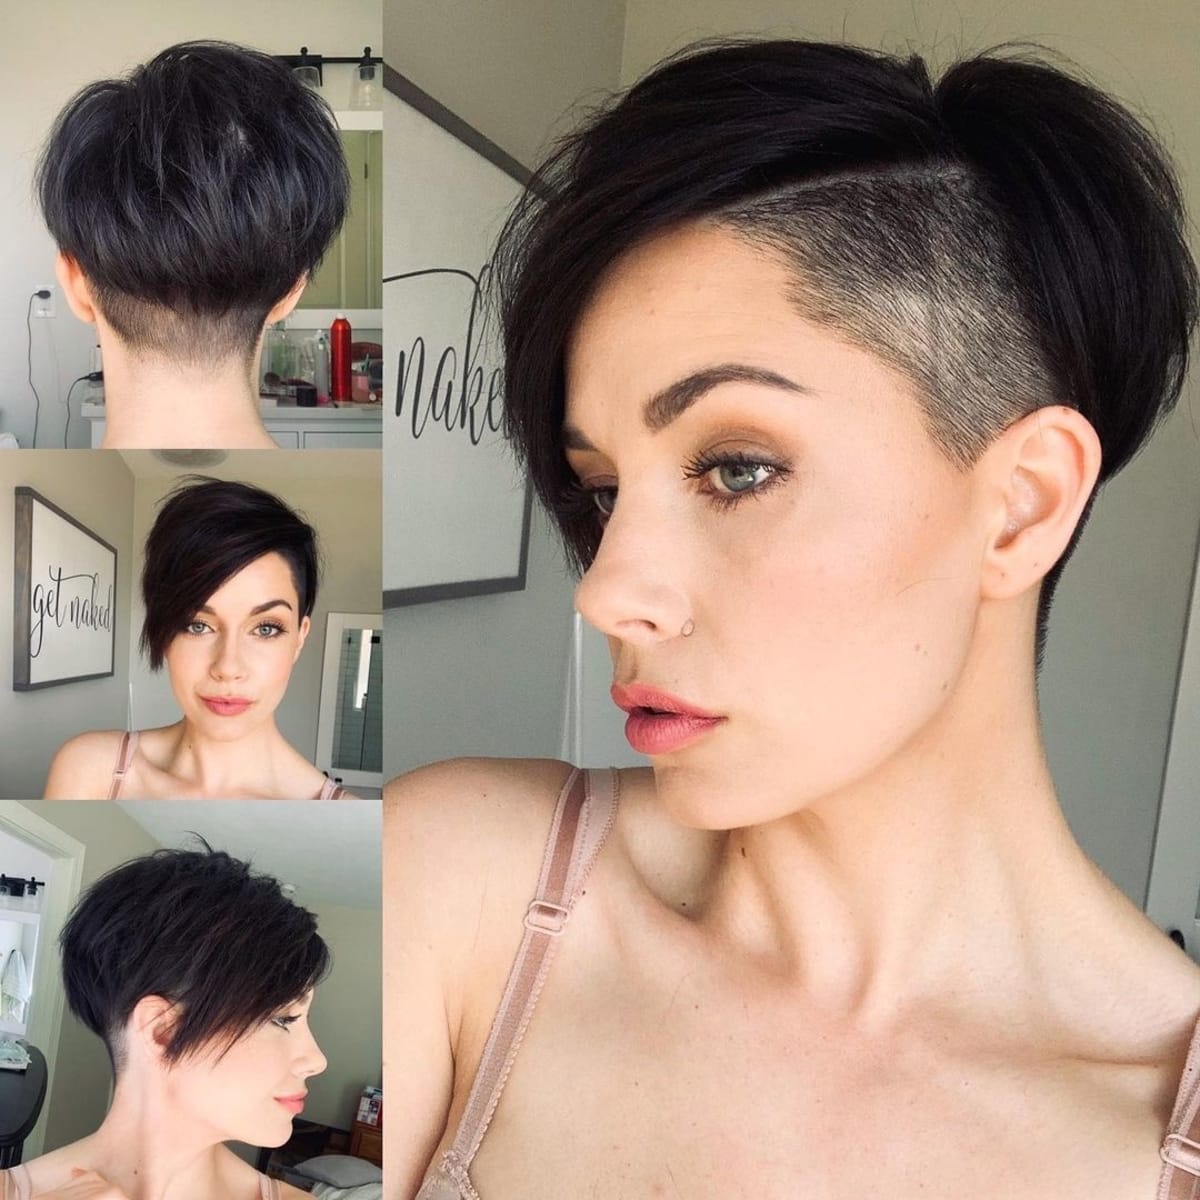 The 15 Most Flattering Short Hairstyles for Thick Hair